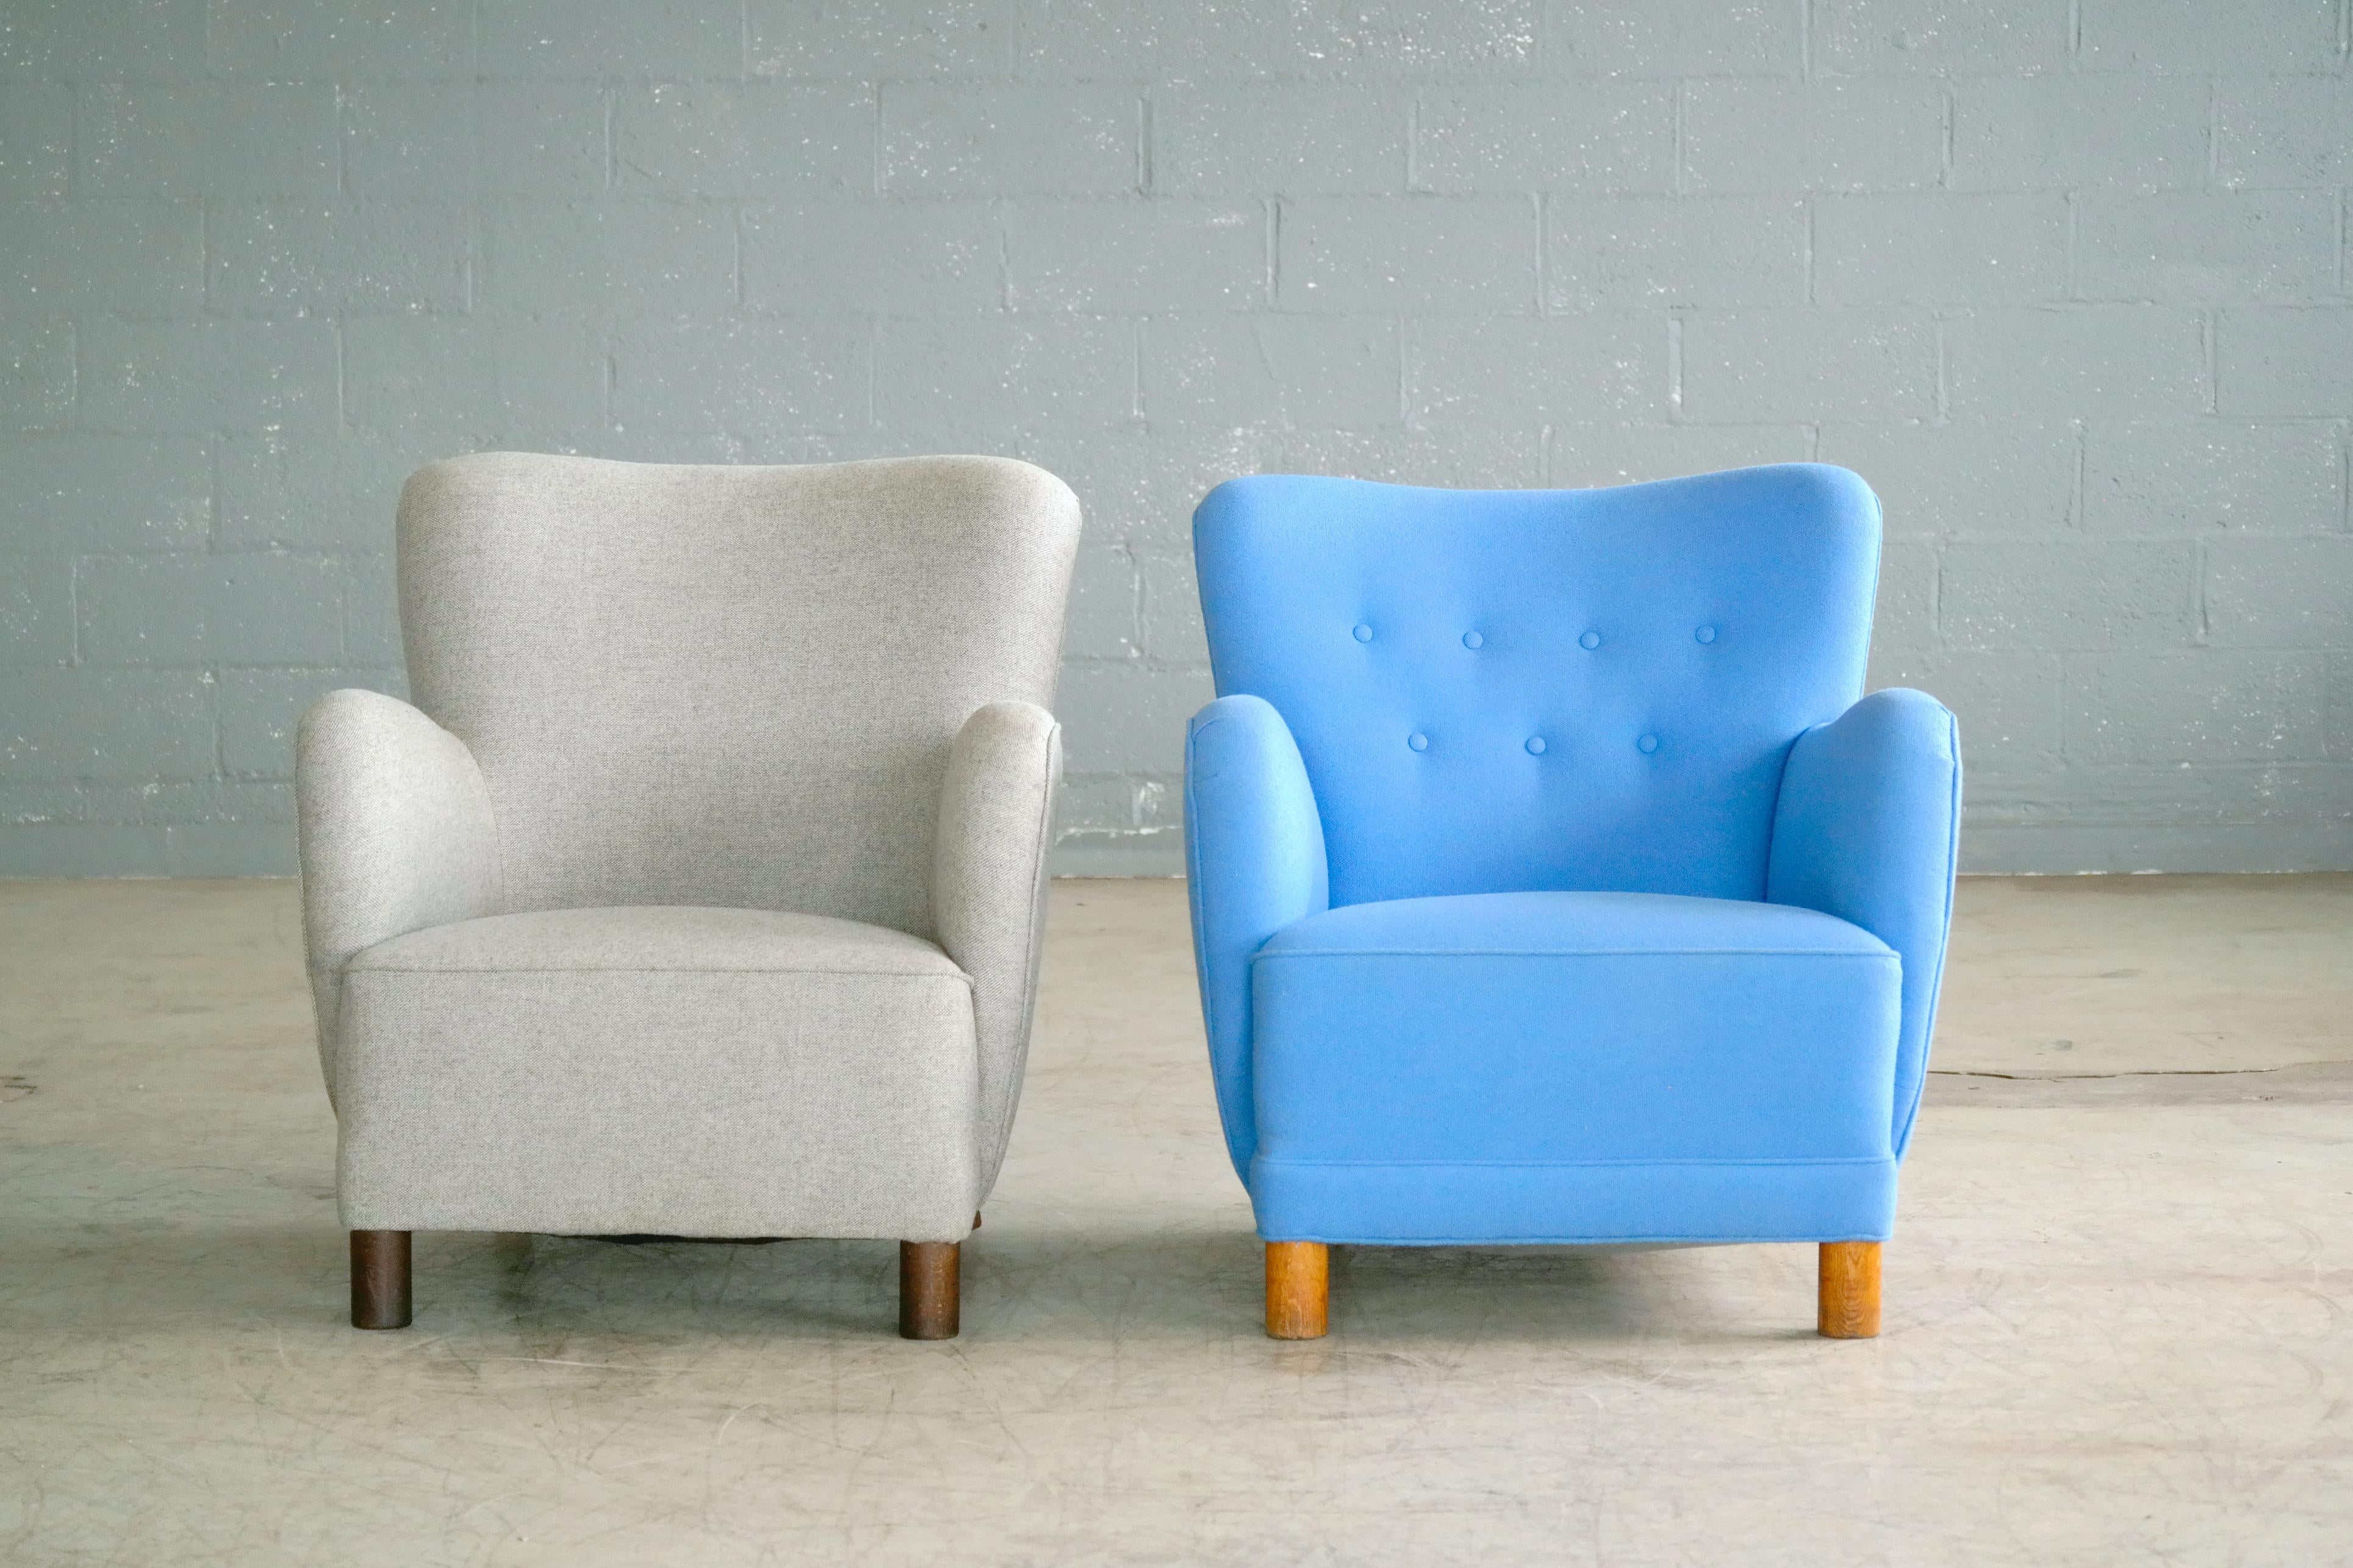 Rare to find Mogens Lassen attributed pair of lowback club chairs from the 1940s featuring the rounded armrest design and the cylindrical front legs that are very characteristic of Lassen. Lassen's unique style is increasingly coveted and copied and